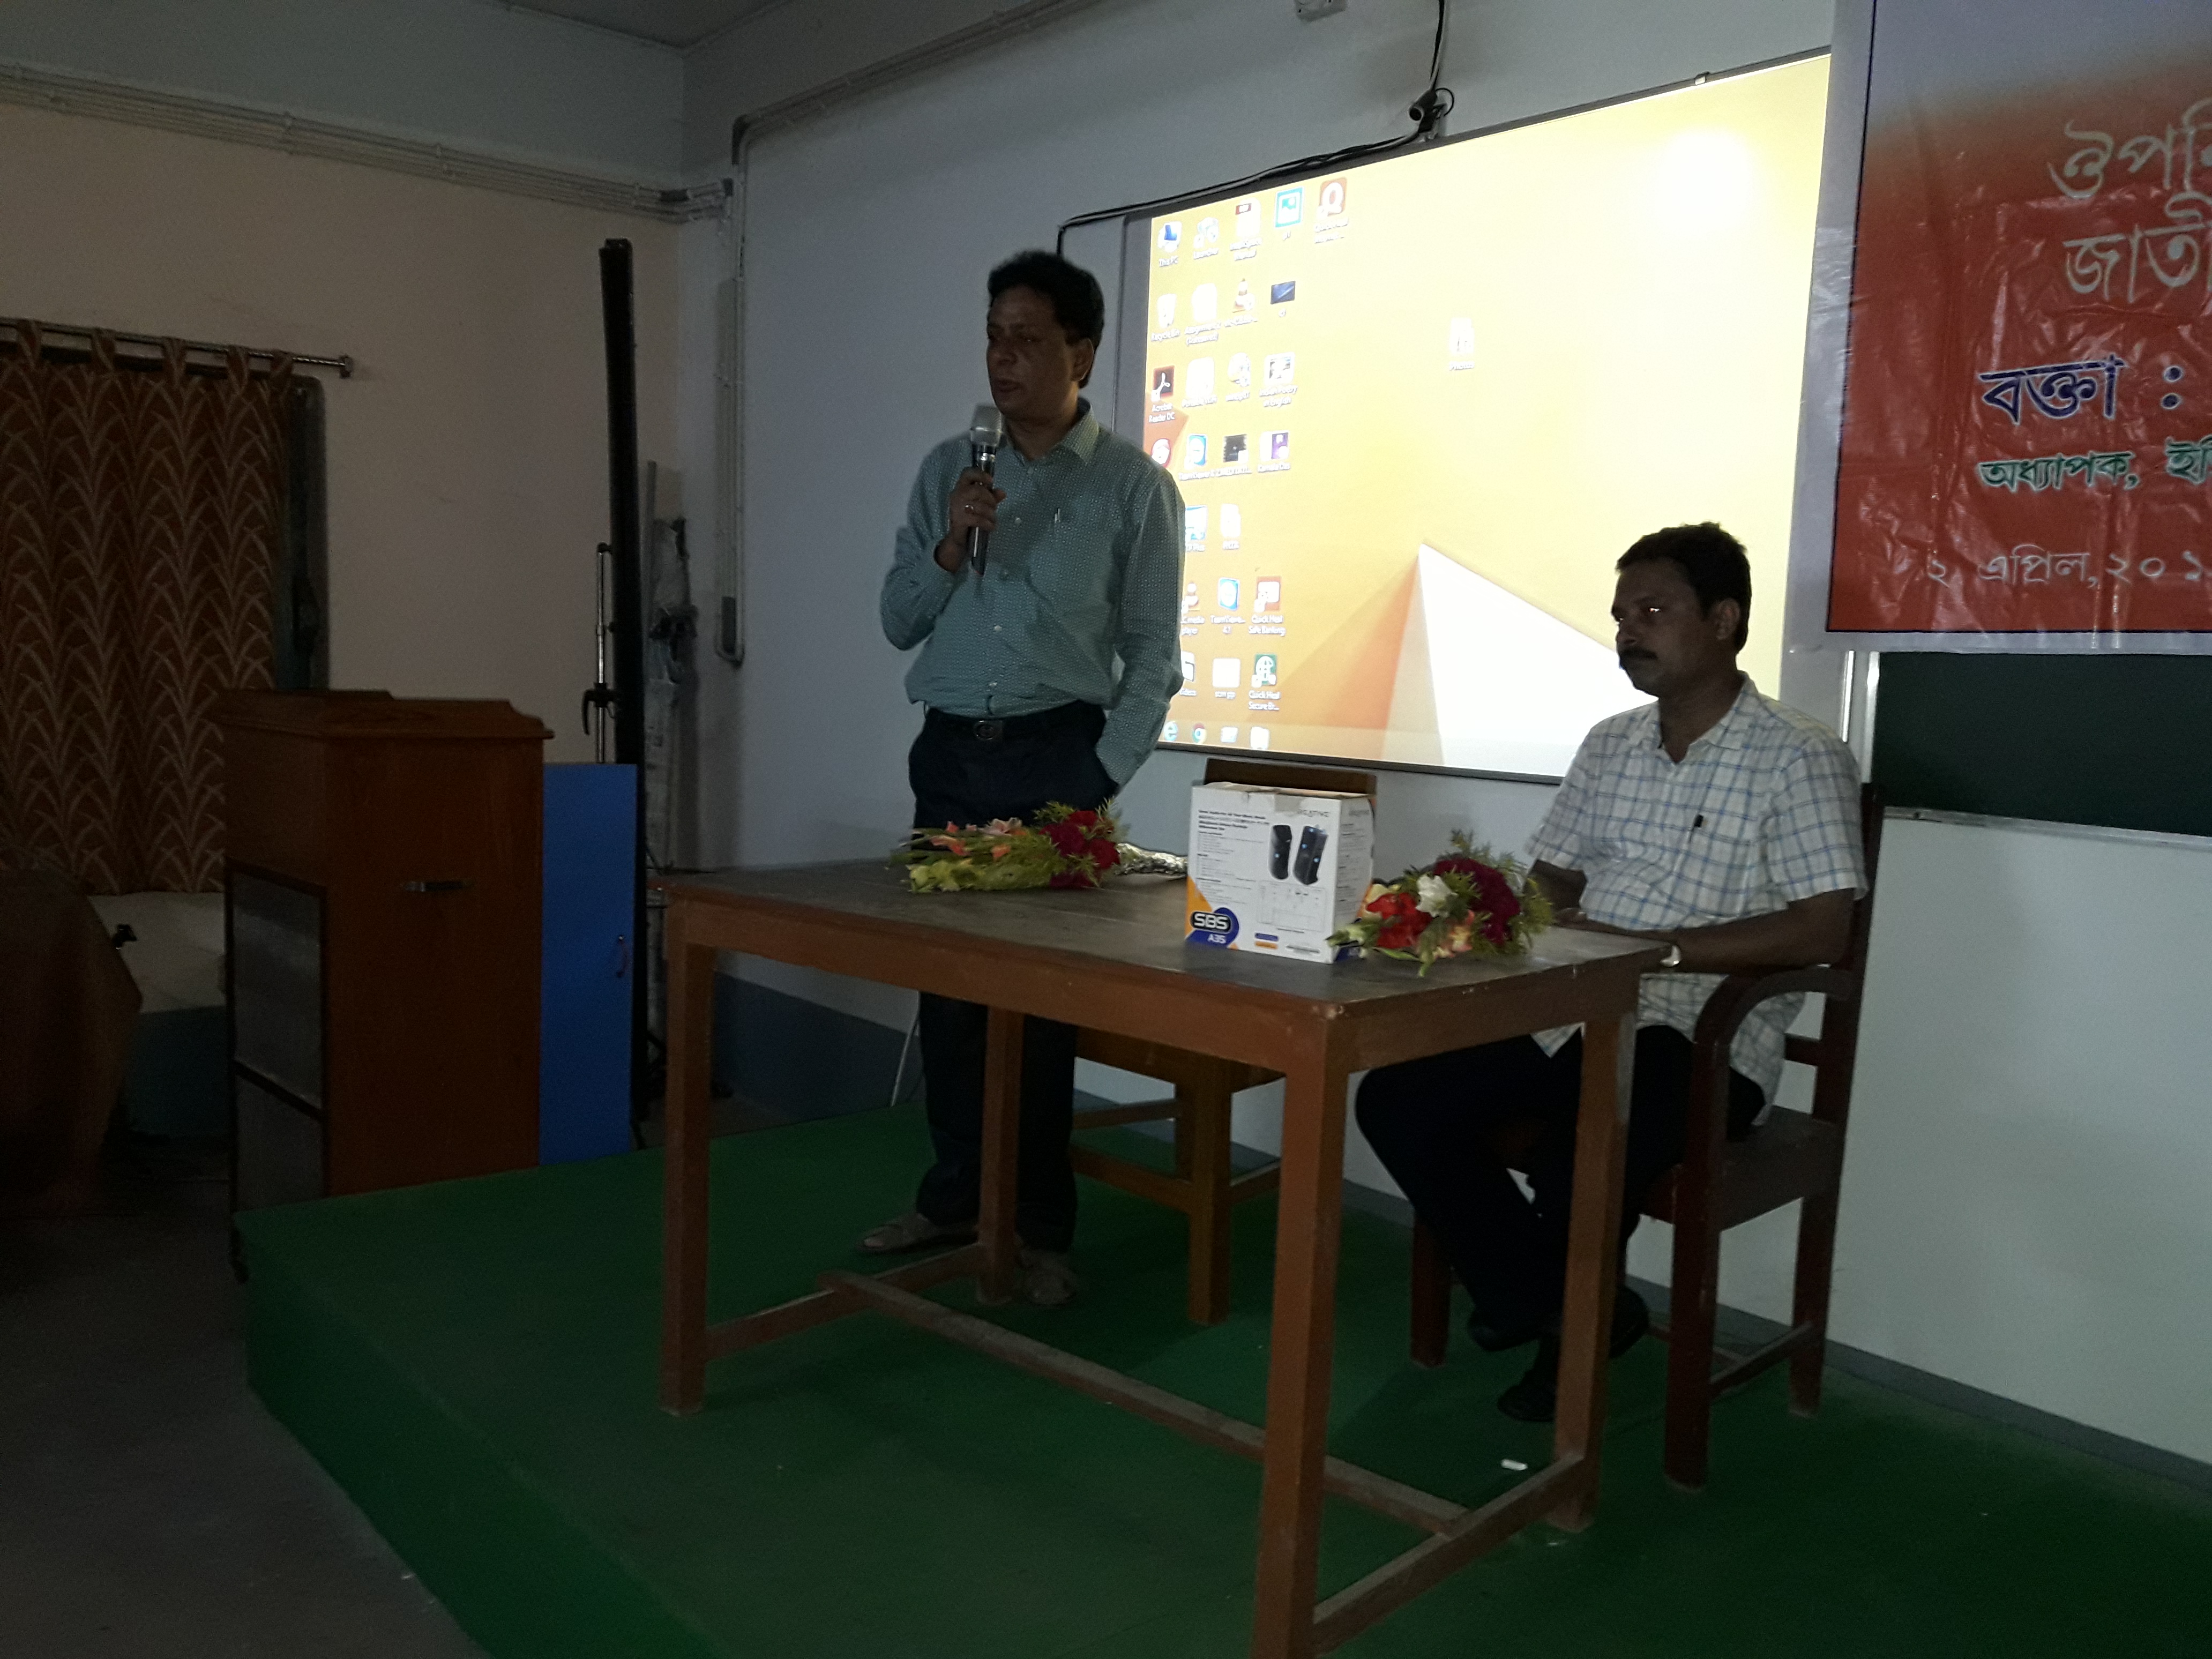 Special Lecture Organized By Department of History, 02-04-2019